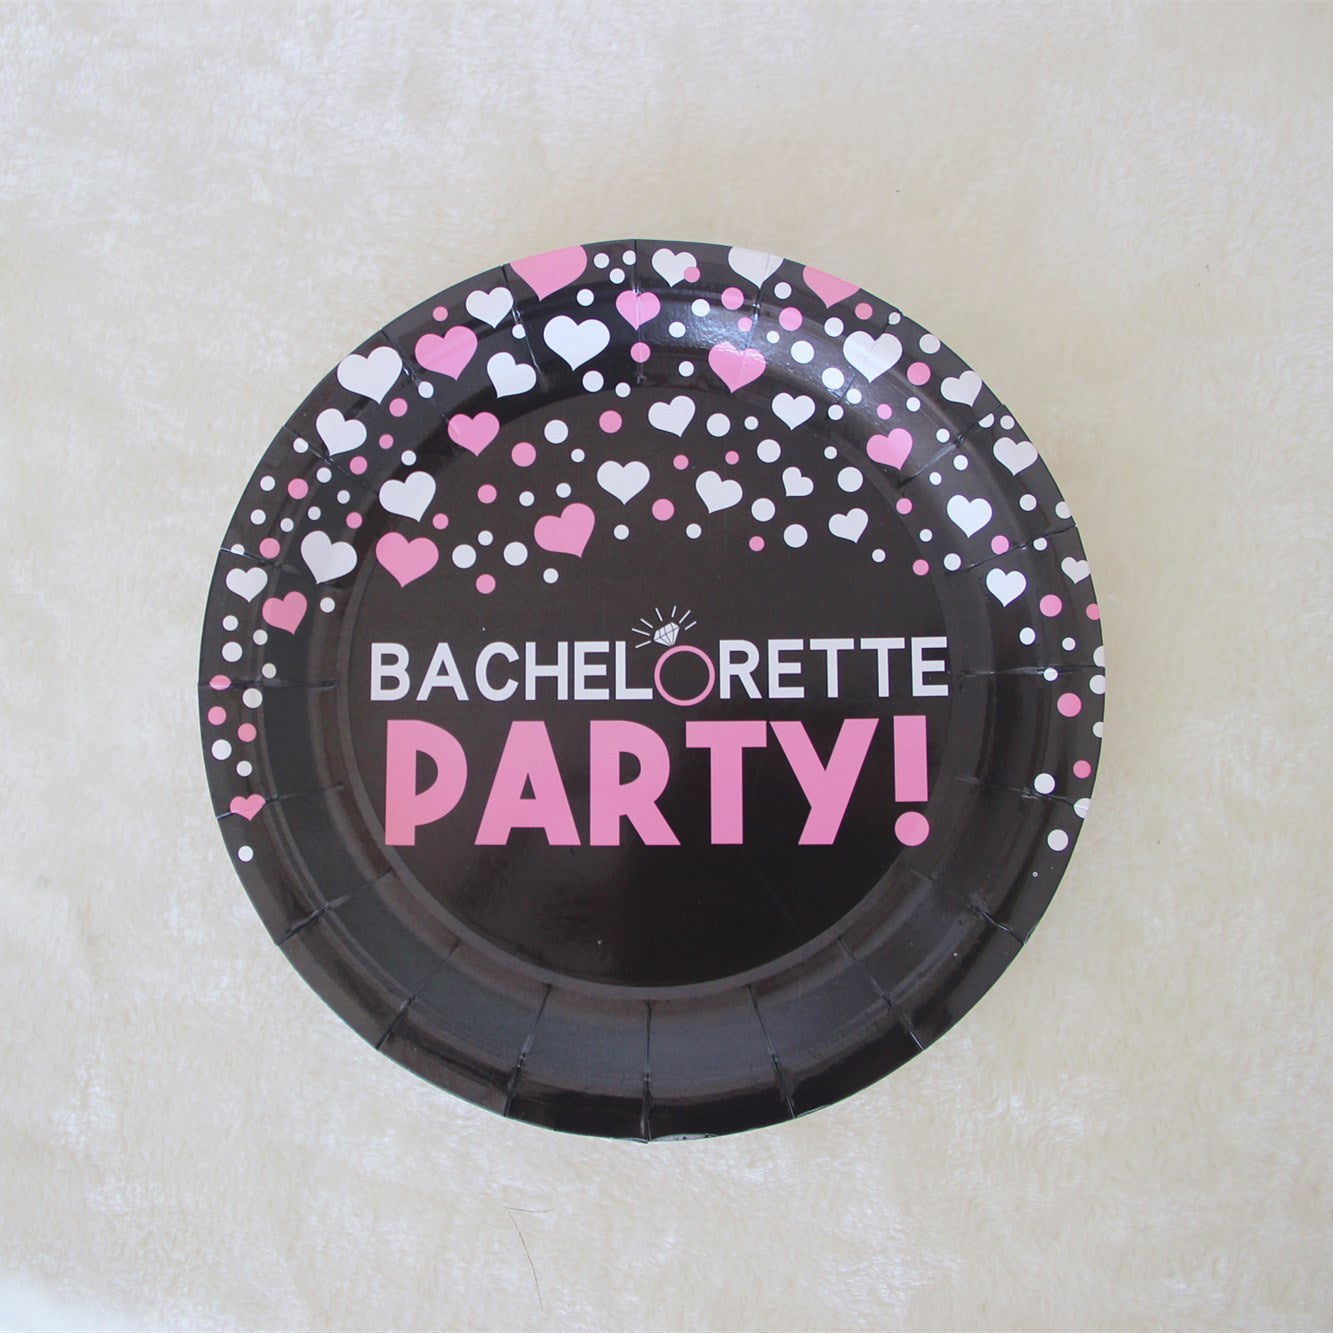 Bachelorette Party Supplies Decorations Paper Plates and Cups and Napkins Tableware Sets for 8